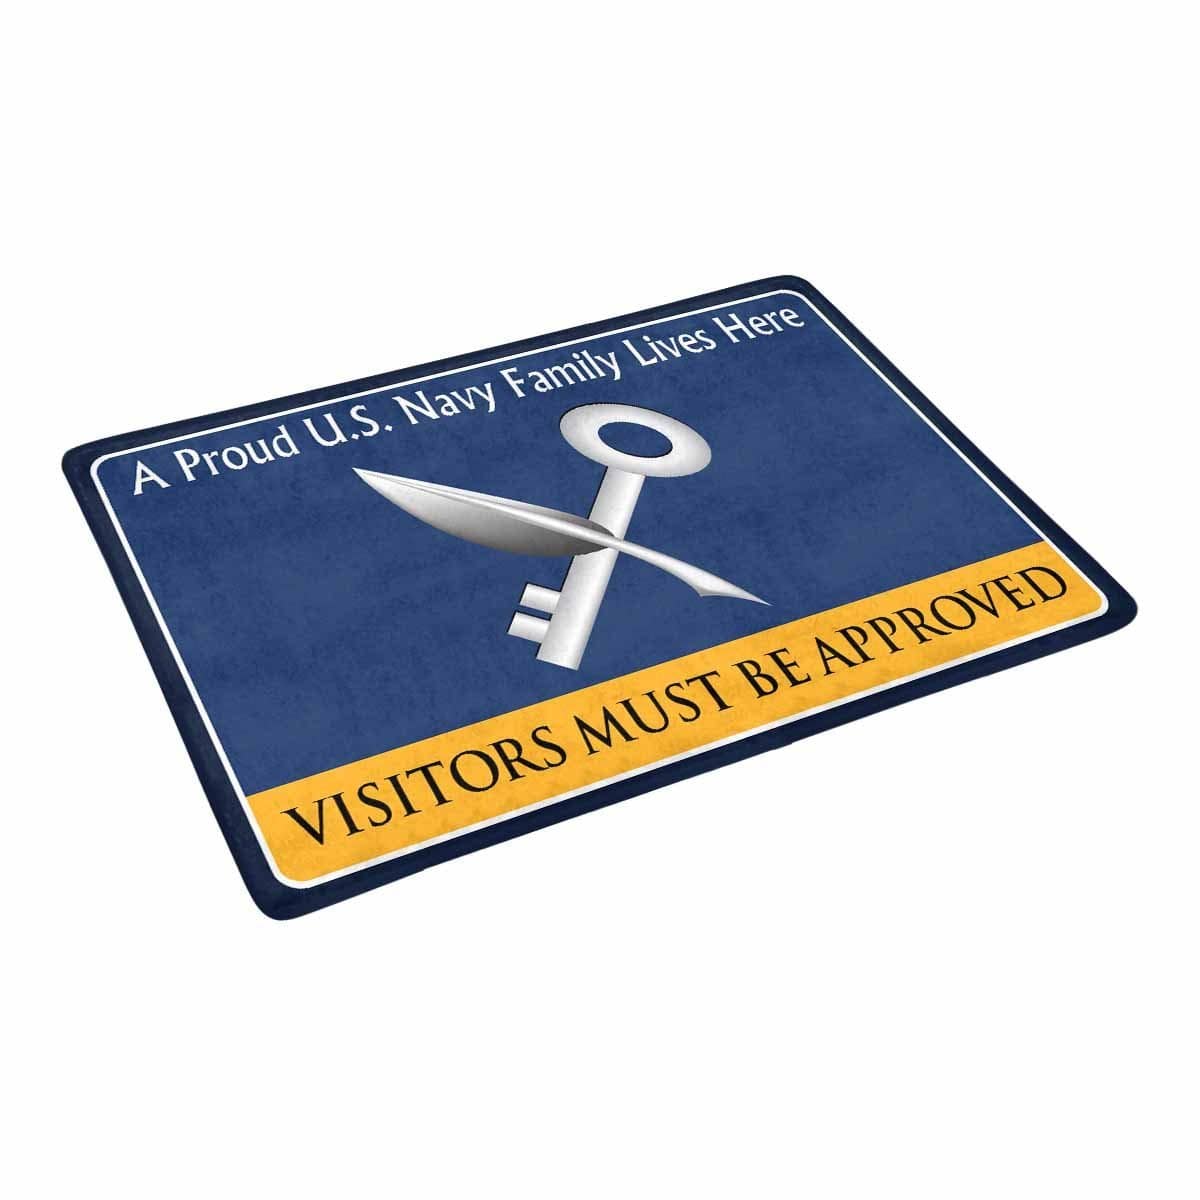 Navy Ship's Serviceman Navy SH Family Doormat - Visitors must be approved (23,6 inches x 15,7 inches)-Doormat-Navy-Rate-Veterans Nation